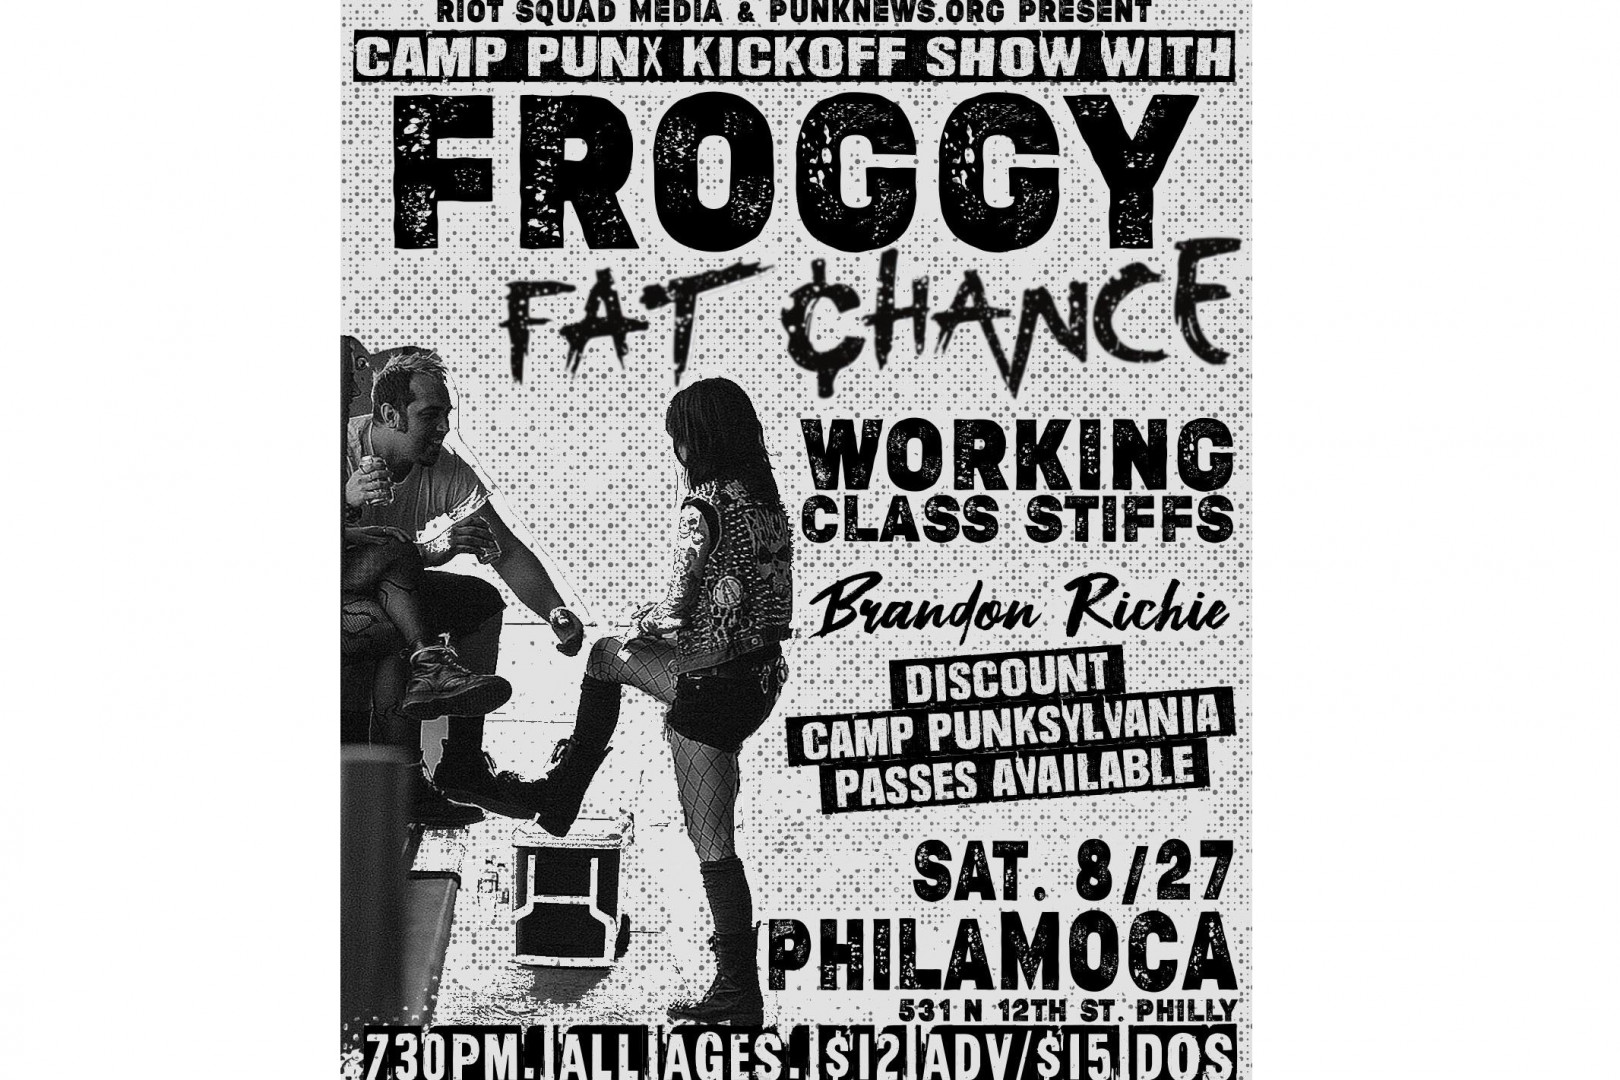 Camp Punksylvania and Punknews to host Kickoff show with Froggy on Aug 27 in Philly